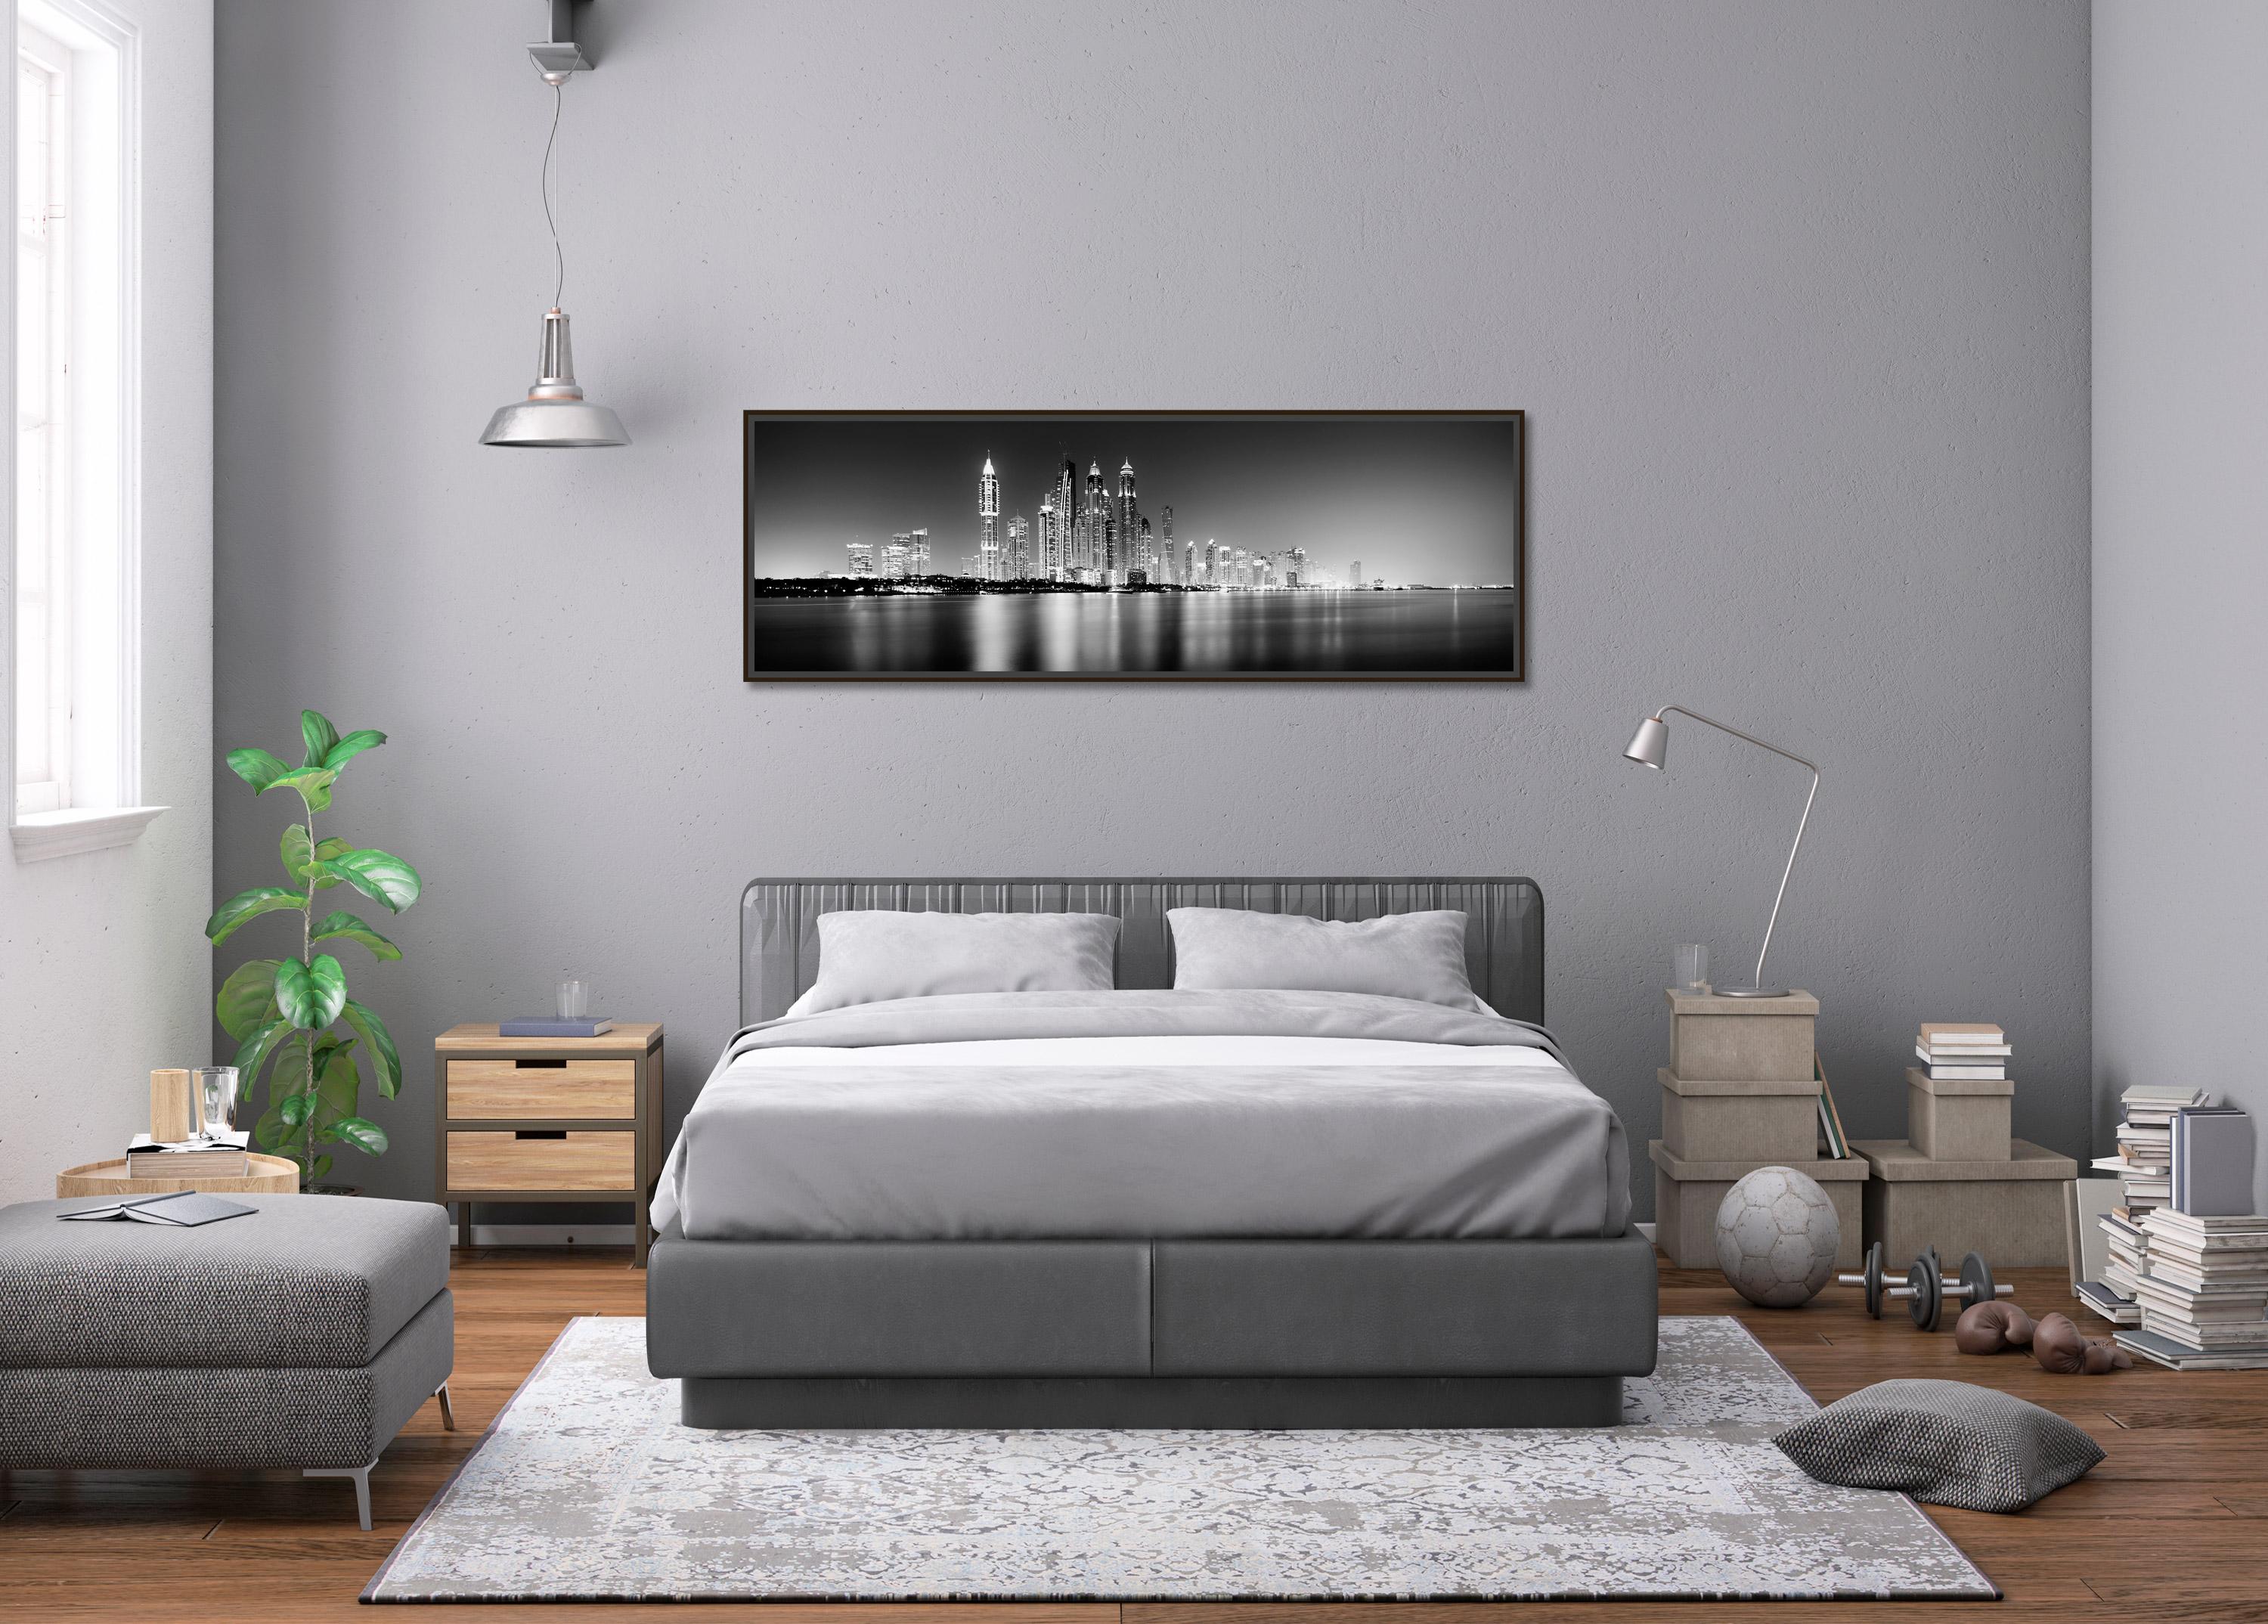 Black and white fine art panorama seascape - cityscape - landscape photography. Impressive skyline of Dubai with the port and the skyscrapers at night. Archival pigment ink print, edition of 9. Signed, titled, dated and numbered by artist.